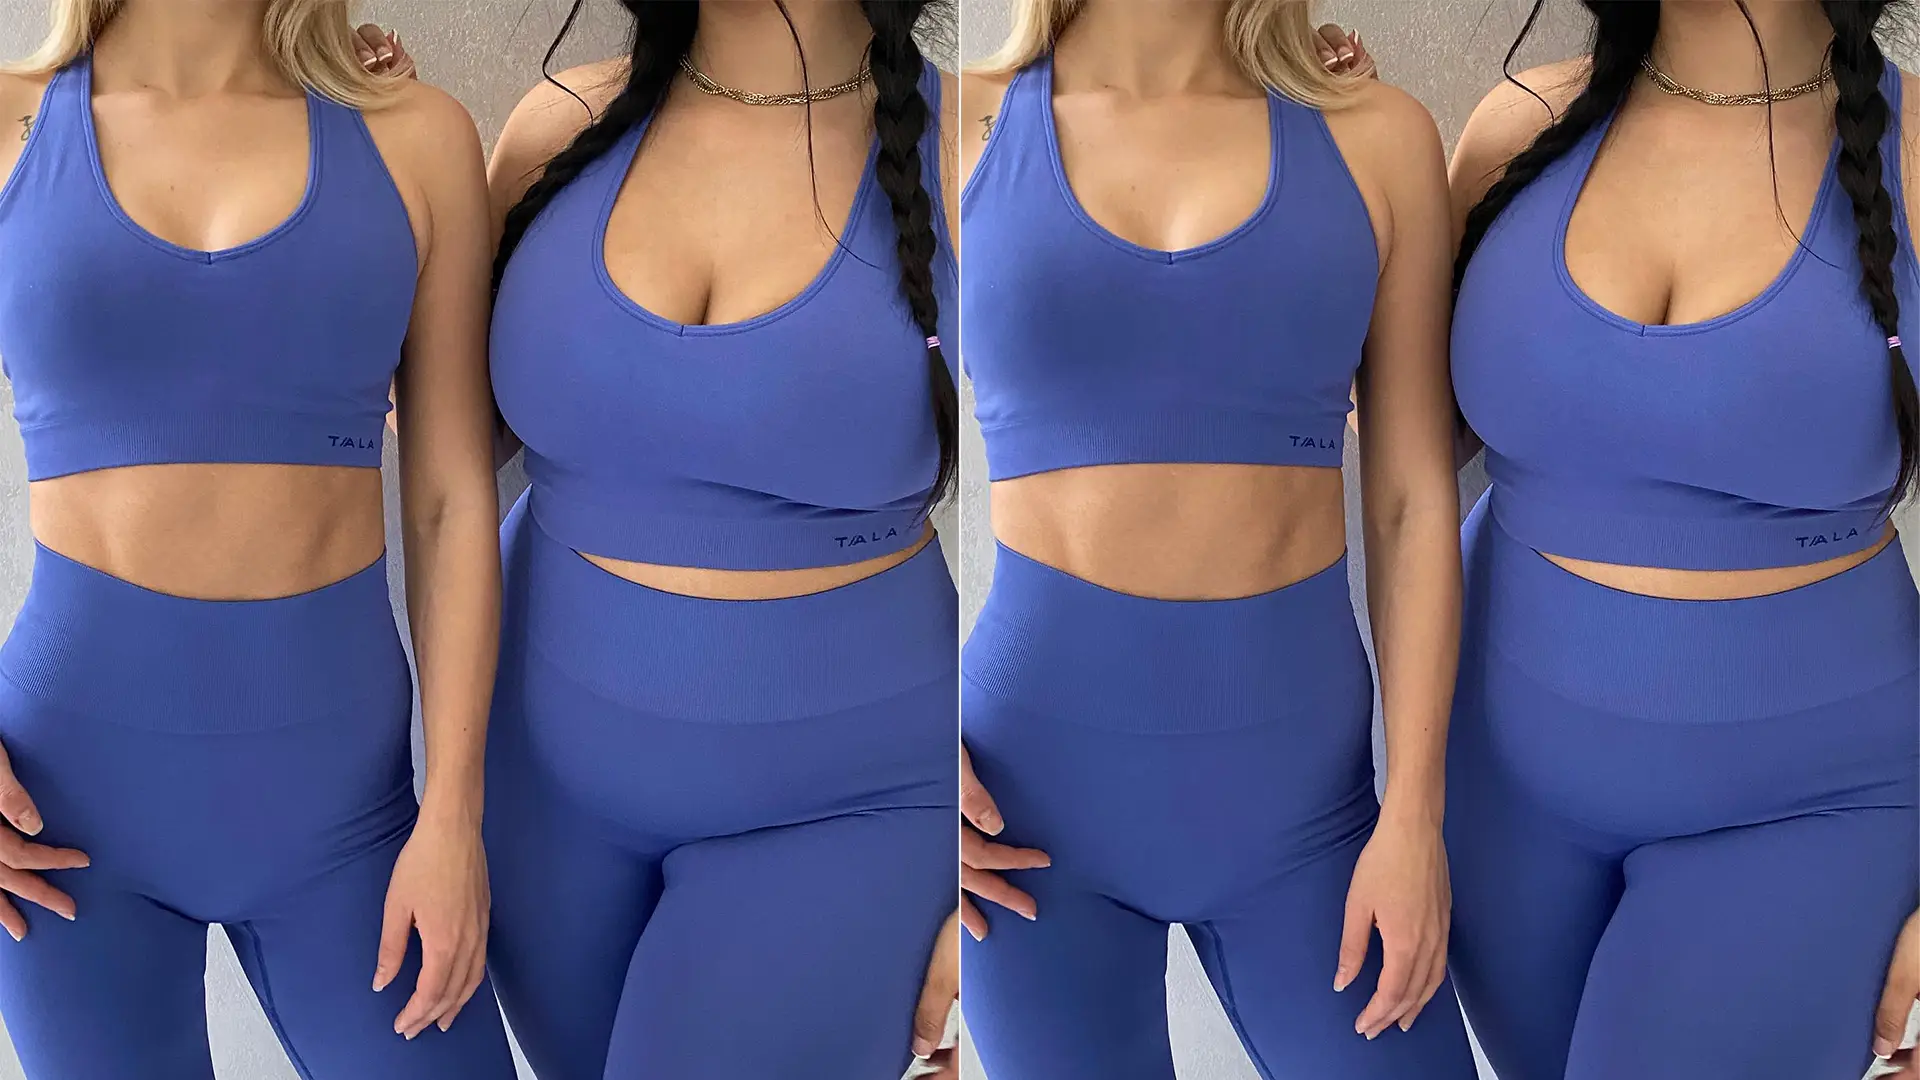 TALA Gym Wear Review & Size Guide: How Does TALA Activewear Fit?